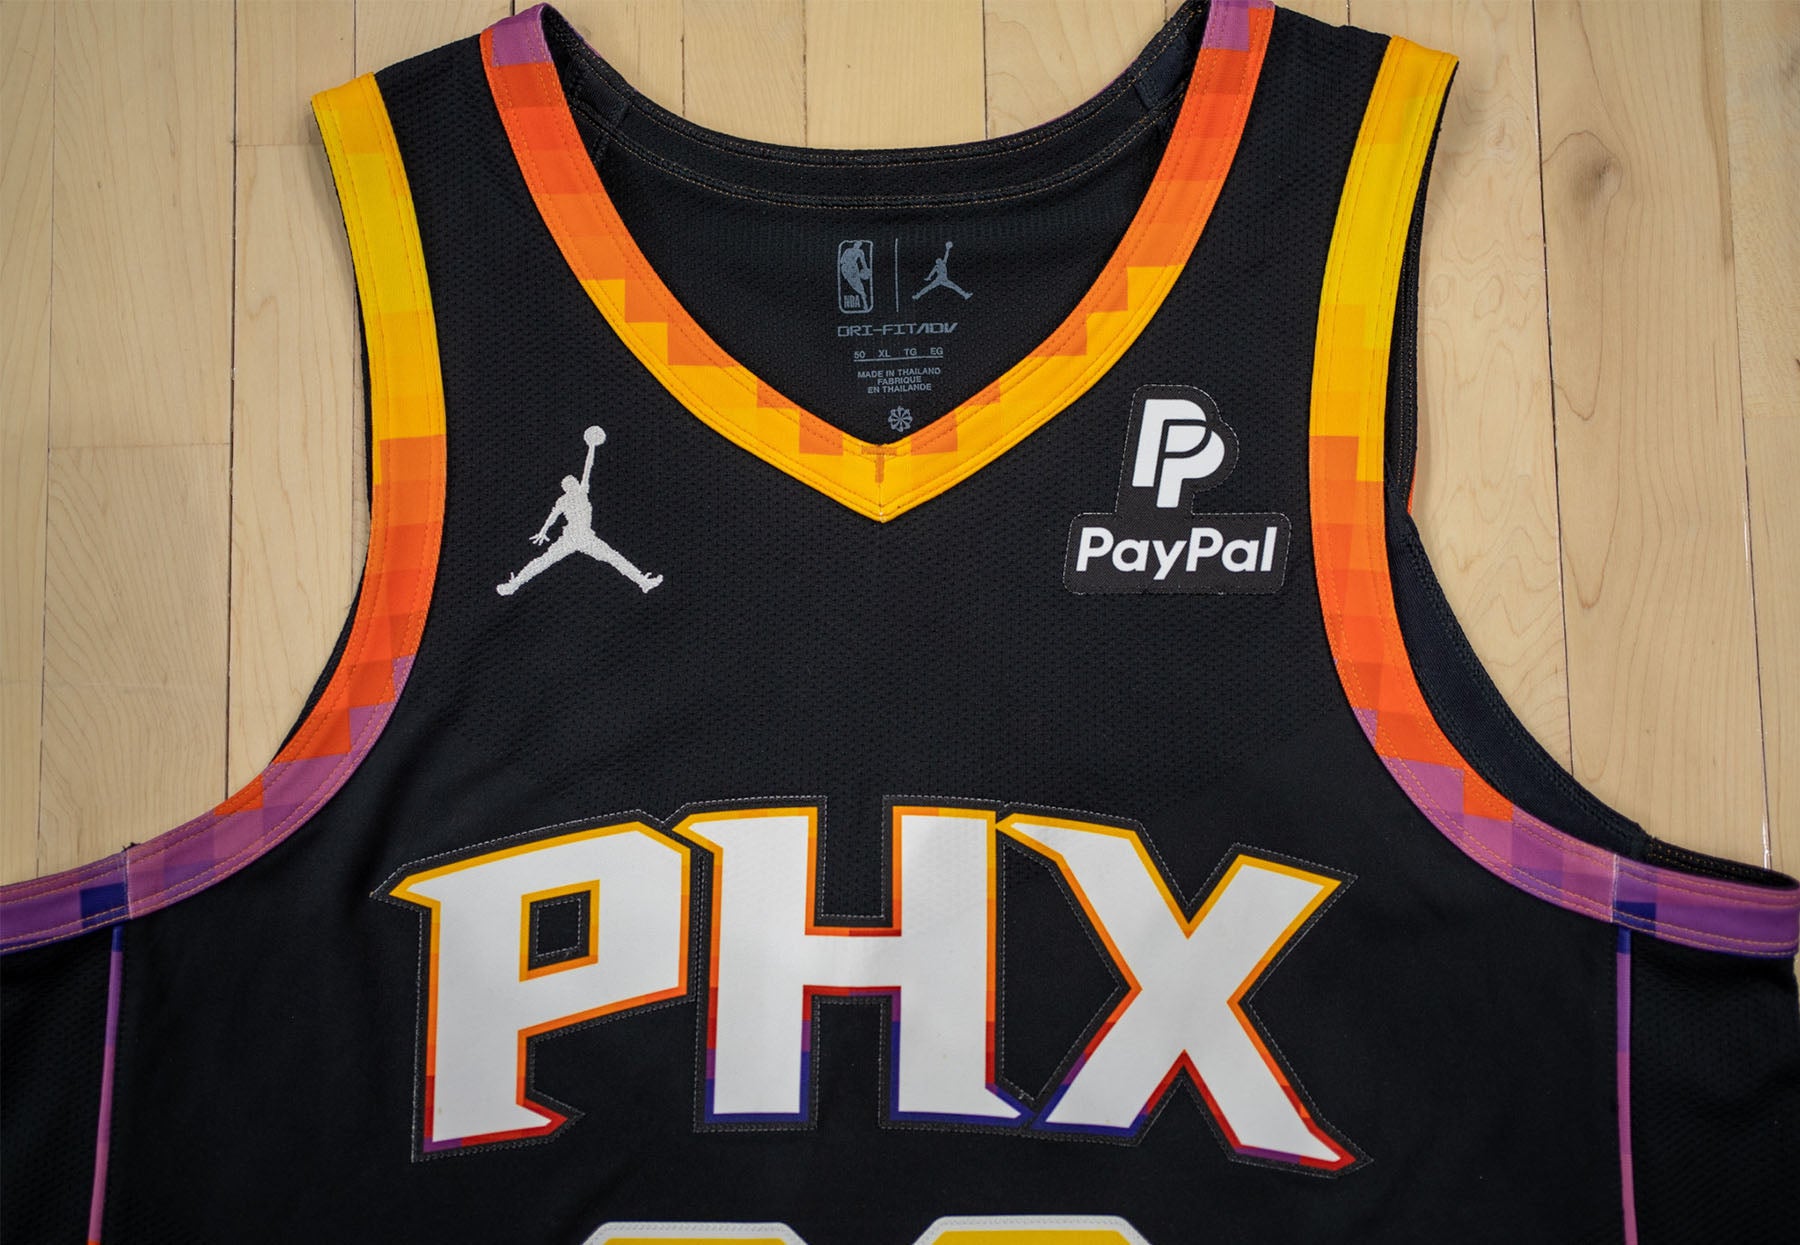 Why Do the Phoenix Suns Have 'The Valley' on Their Jerseys?